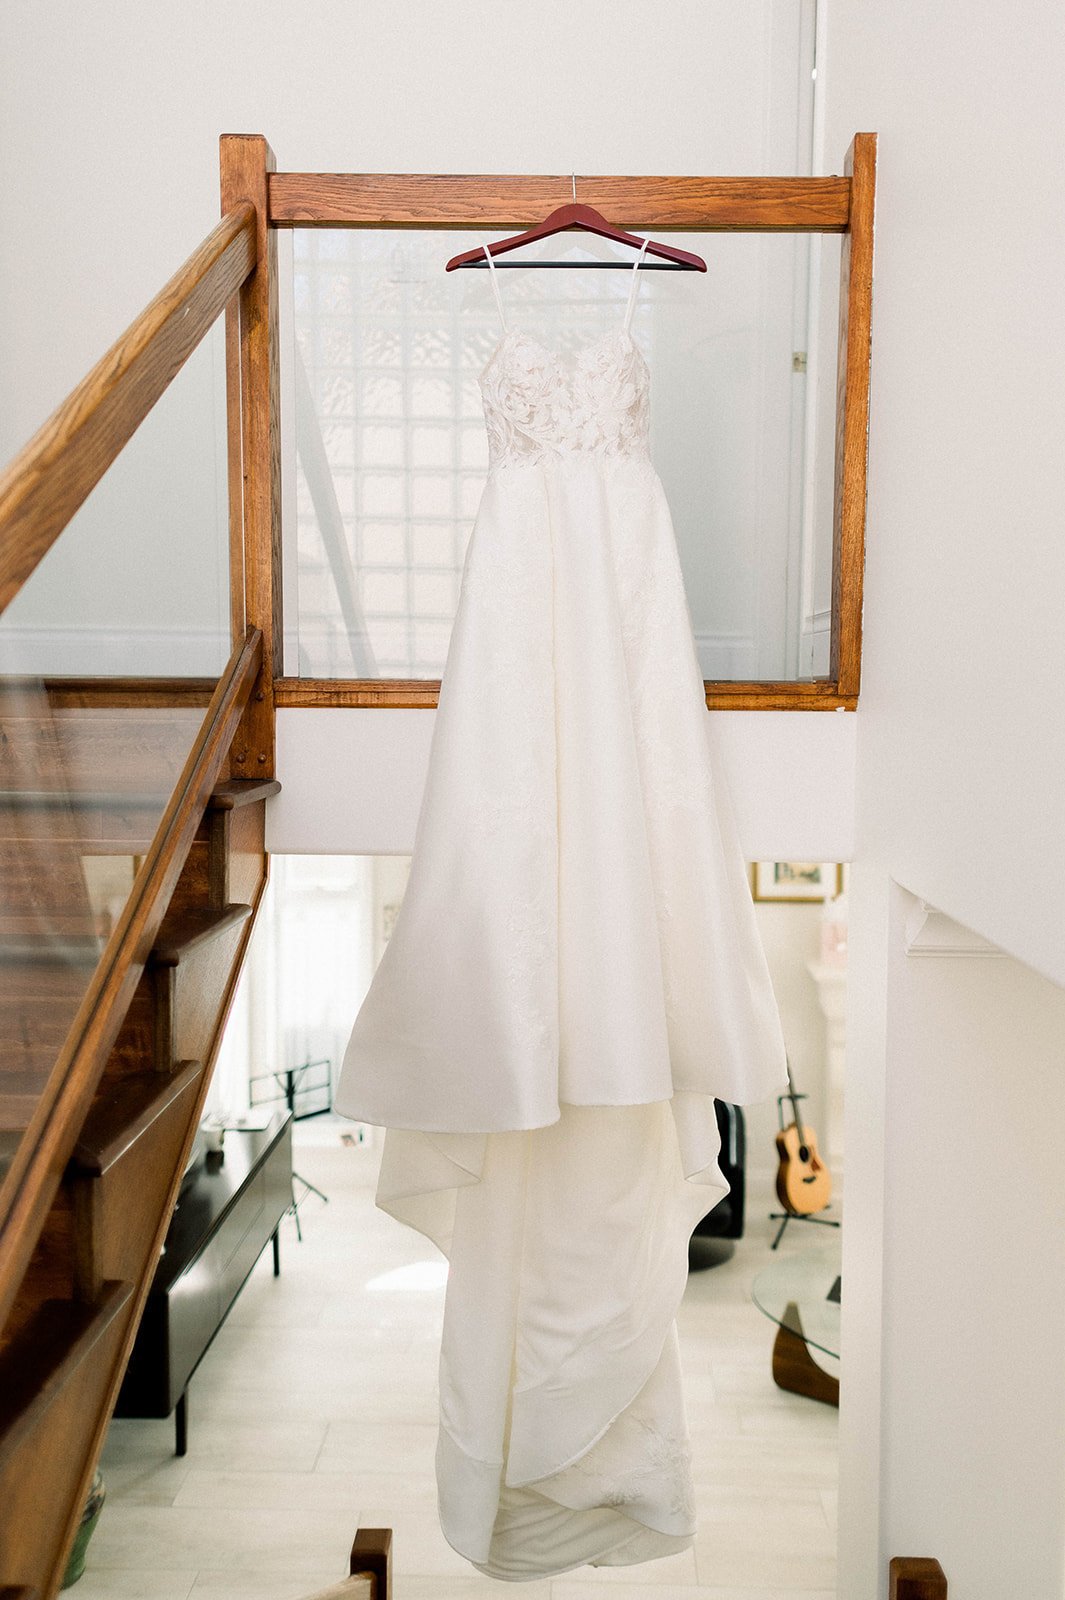 White lace wedding dress hangs from staircase in hart house wedding in Vancouver